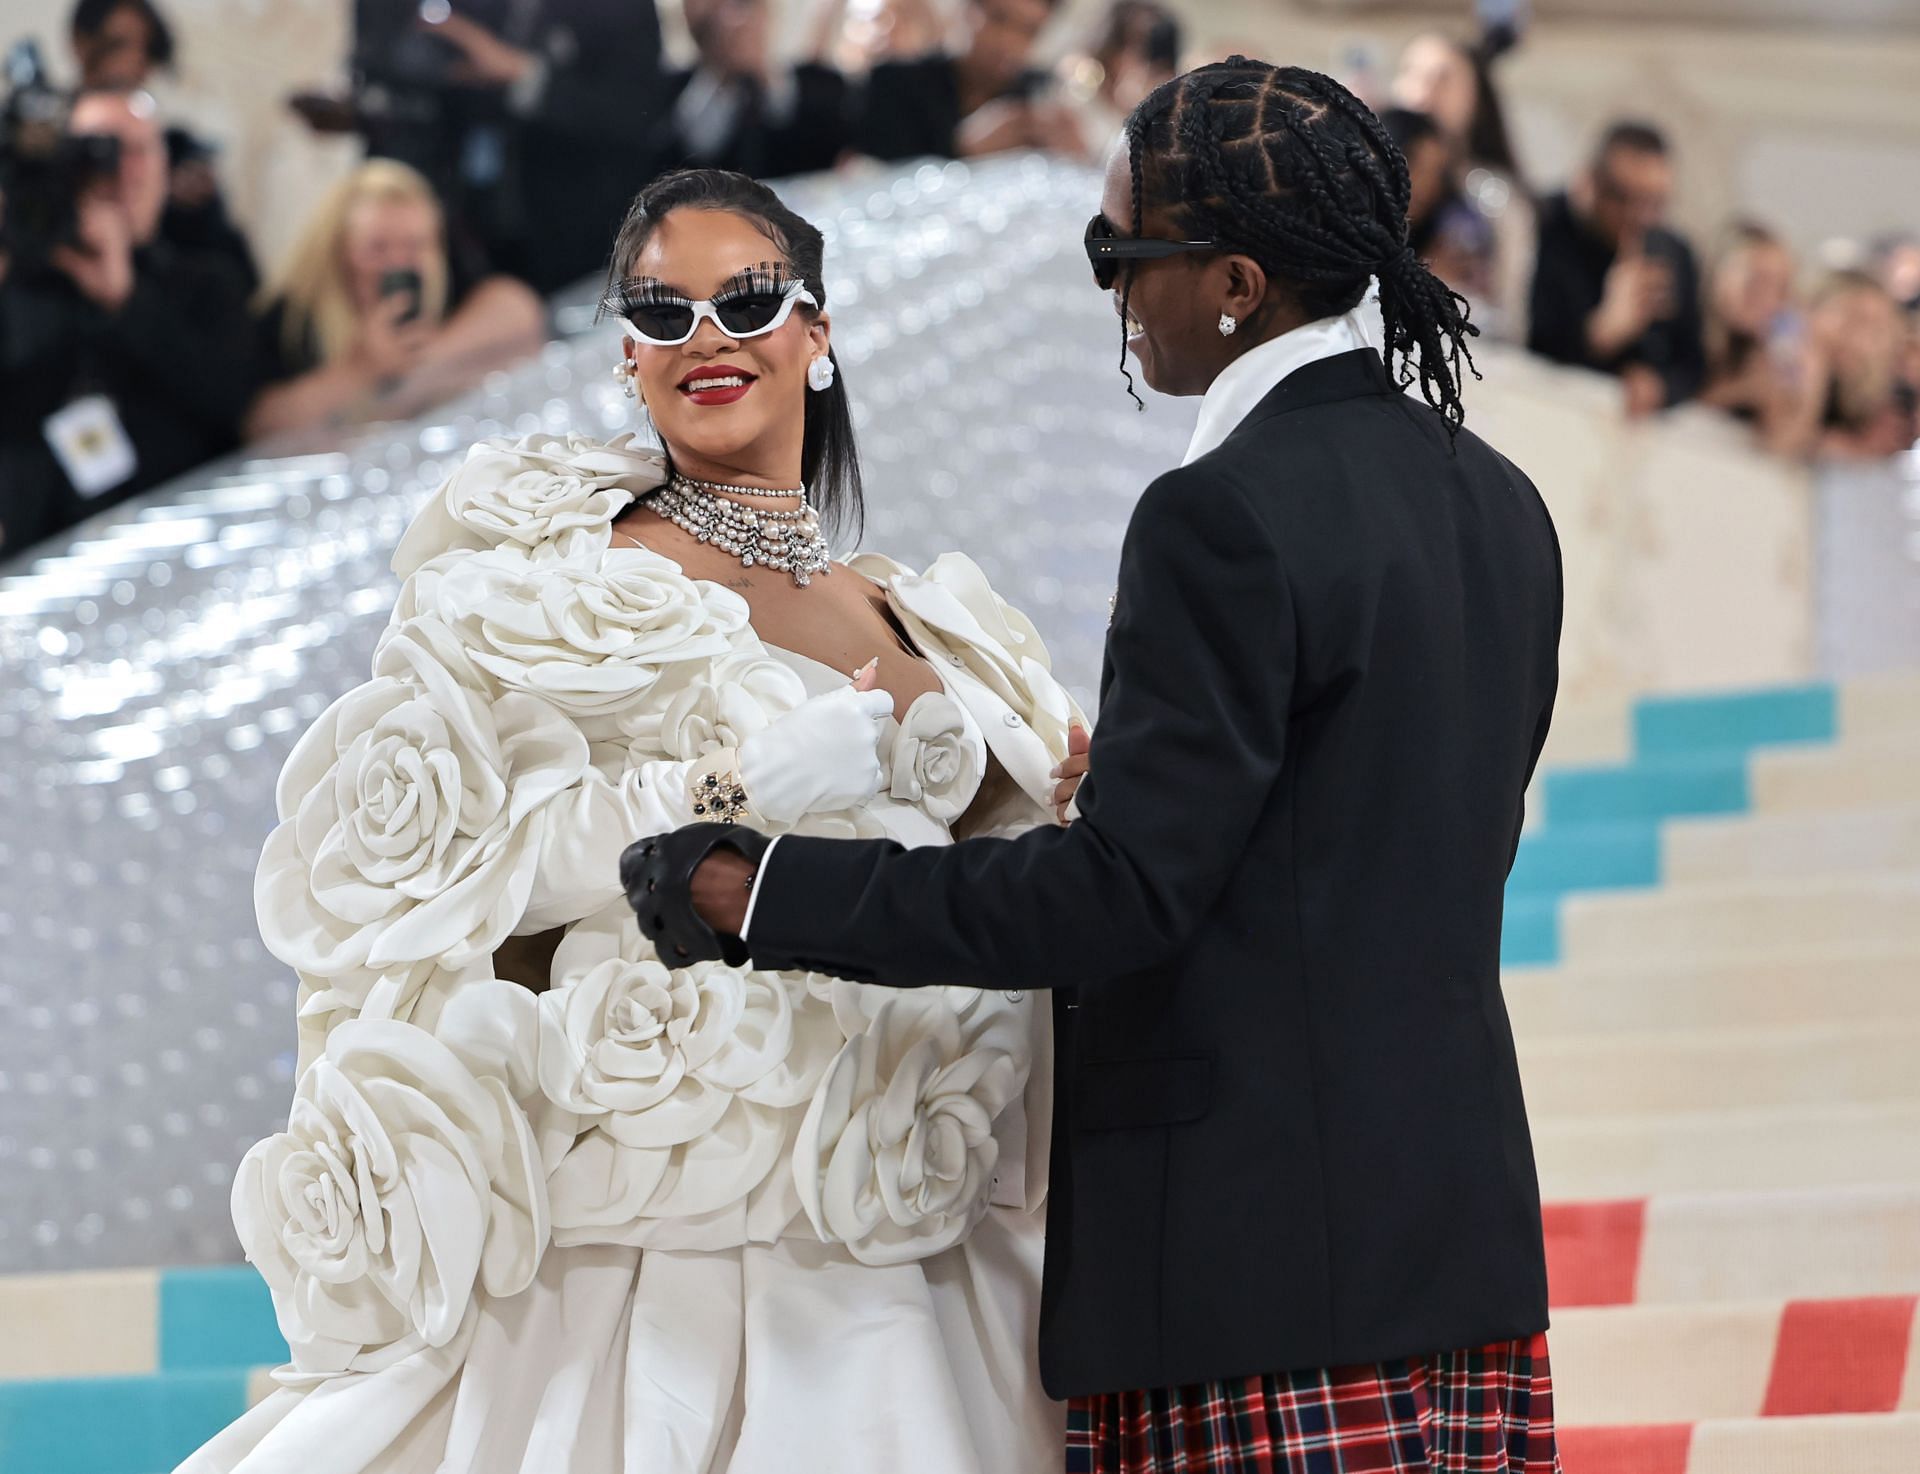 “Rihanna married her muse”: Internet goes wild over Fenty Skin’s new ad ...